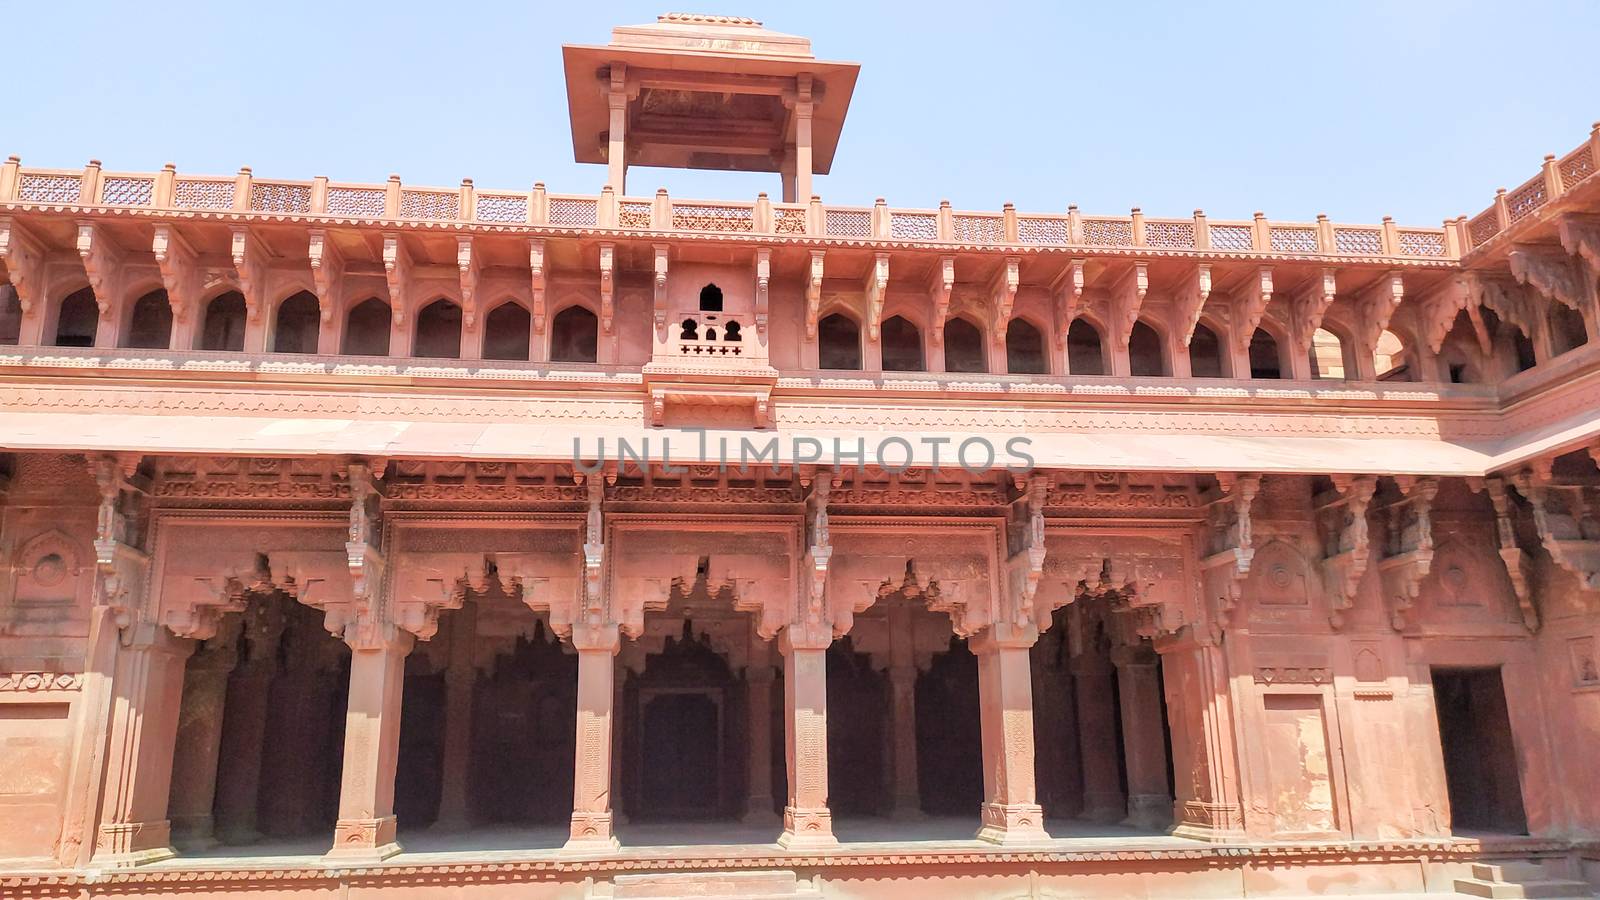 Orchha Fort agra fort Jahangir Mahal a pink sandstone fortification Palace of moghuls emperor Mahal-e-Jahangir a citadel and garrison and unesco heritage site and ancient ruins Agra India May 2019